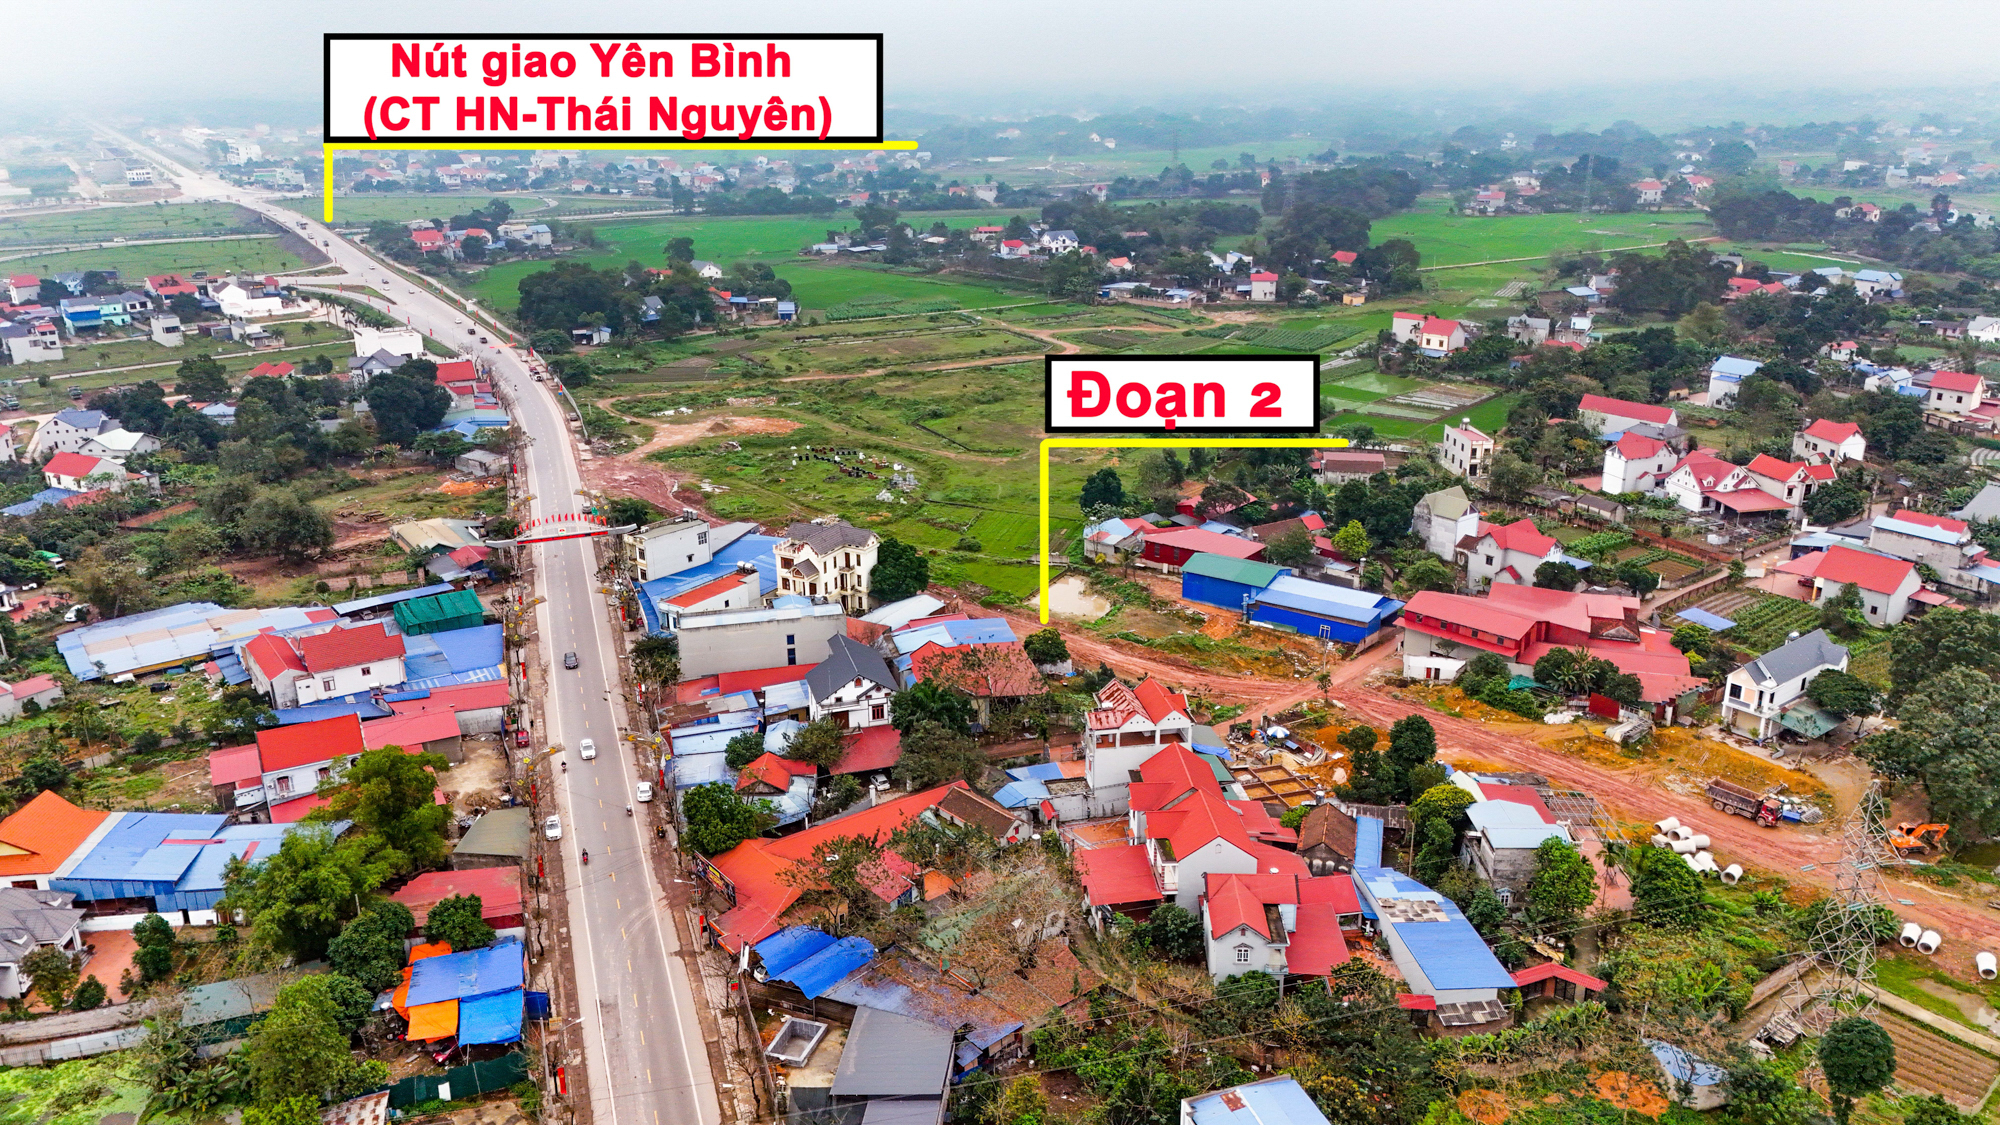 Panorama of the area where a road worth nearly 4.000 billion was built, connecting 3 industrial centers of the North - Photo 5.